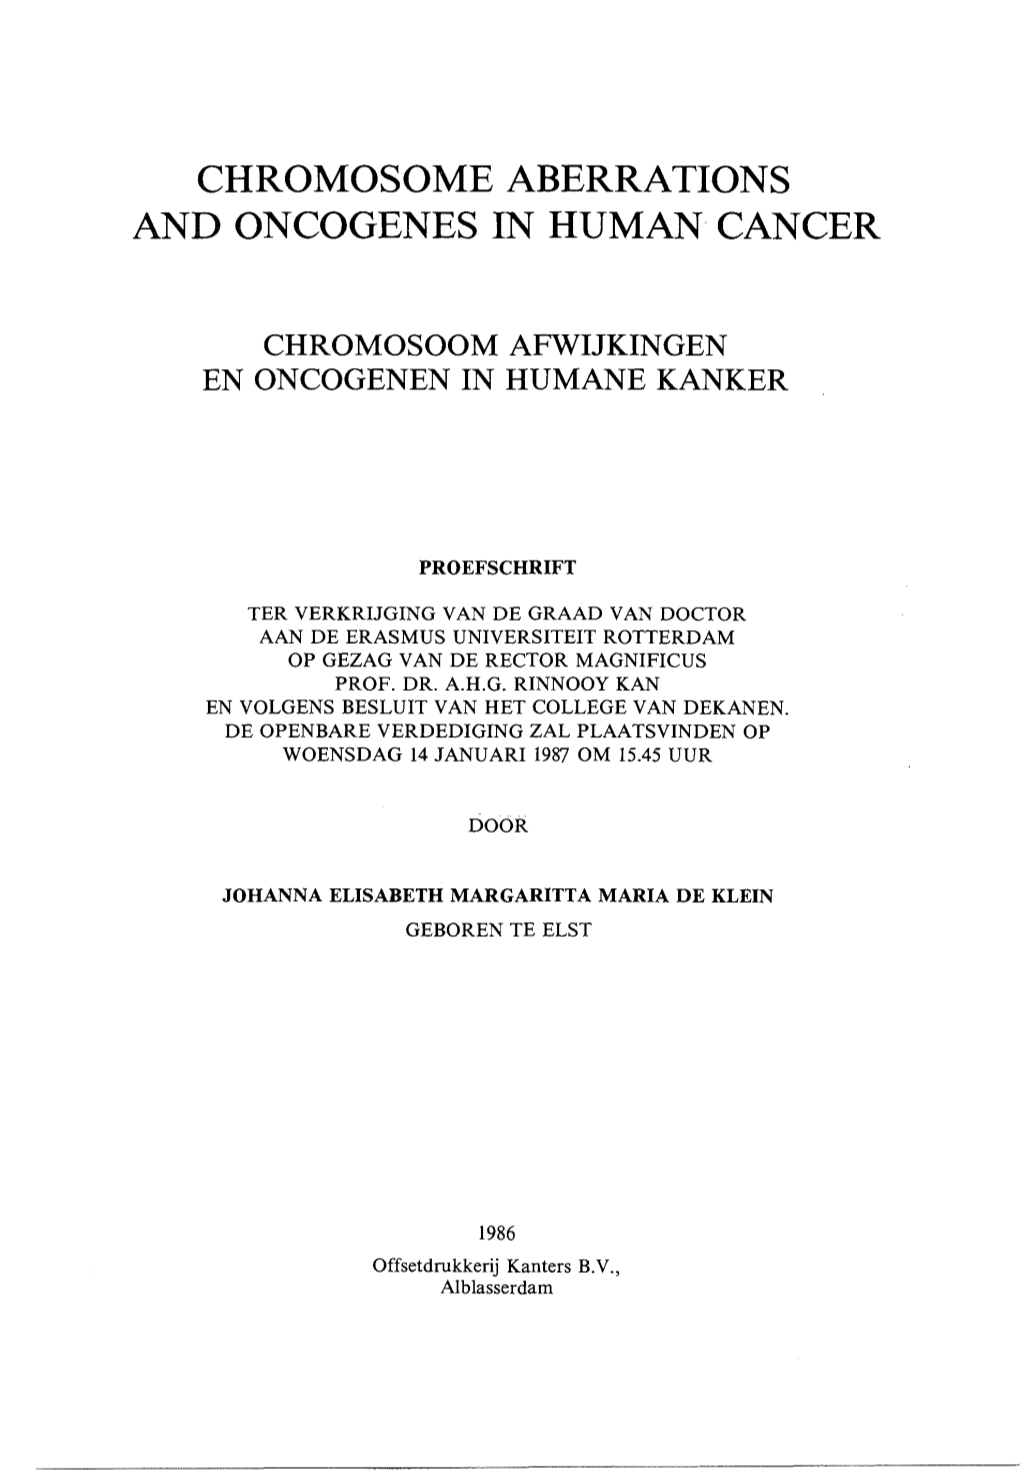 Chromosome Aberrations and Oncogenes in Human Cancer